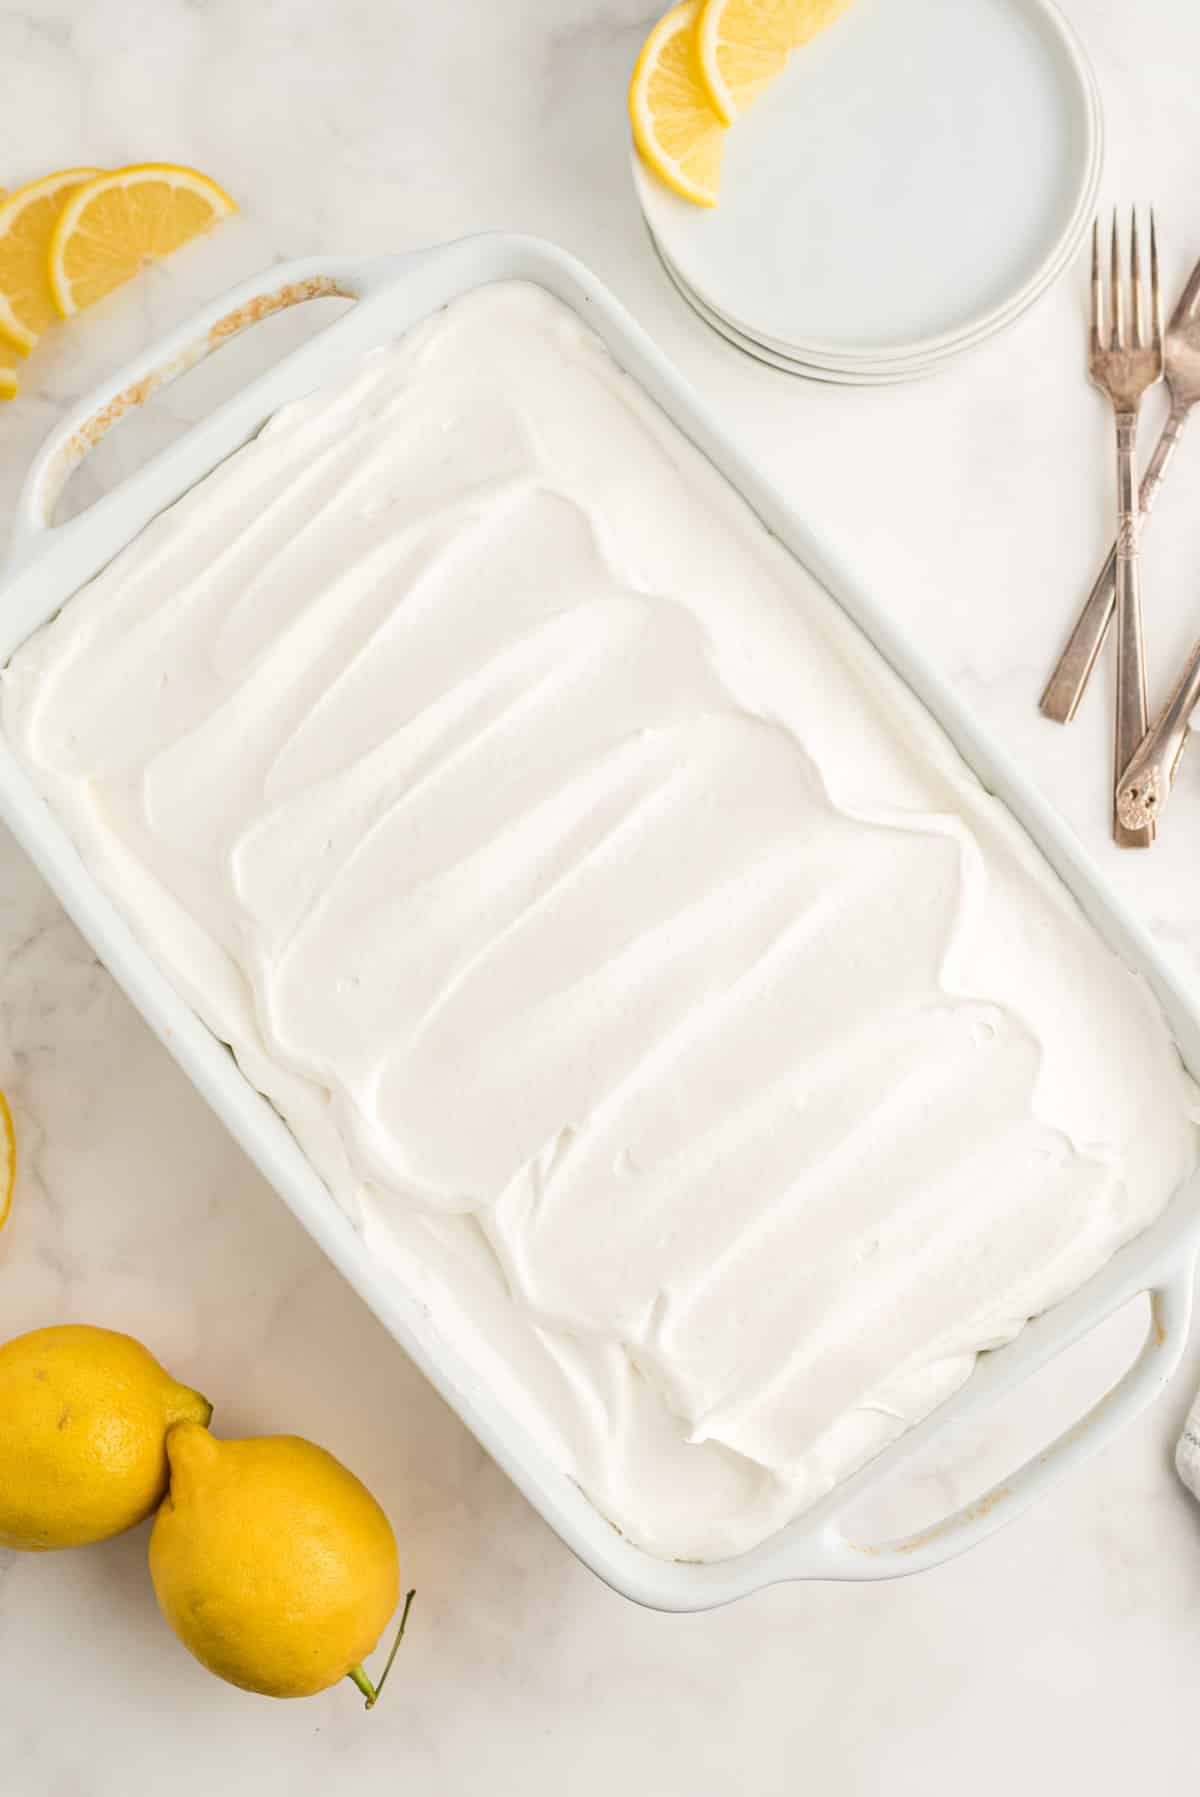 A Lemon Lush dessert in a white baking dish, topped with whipped cream.